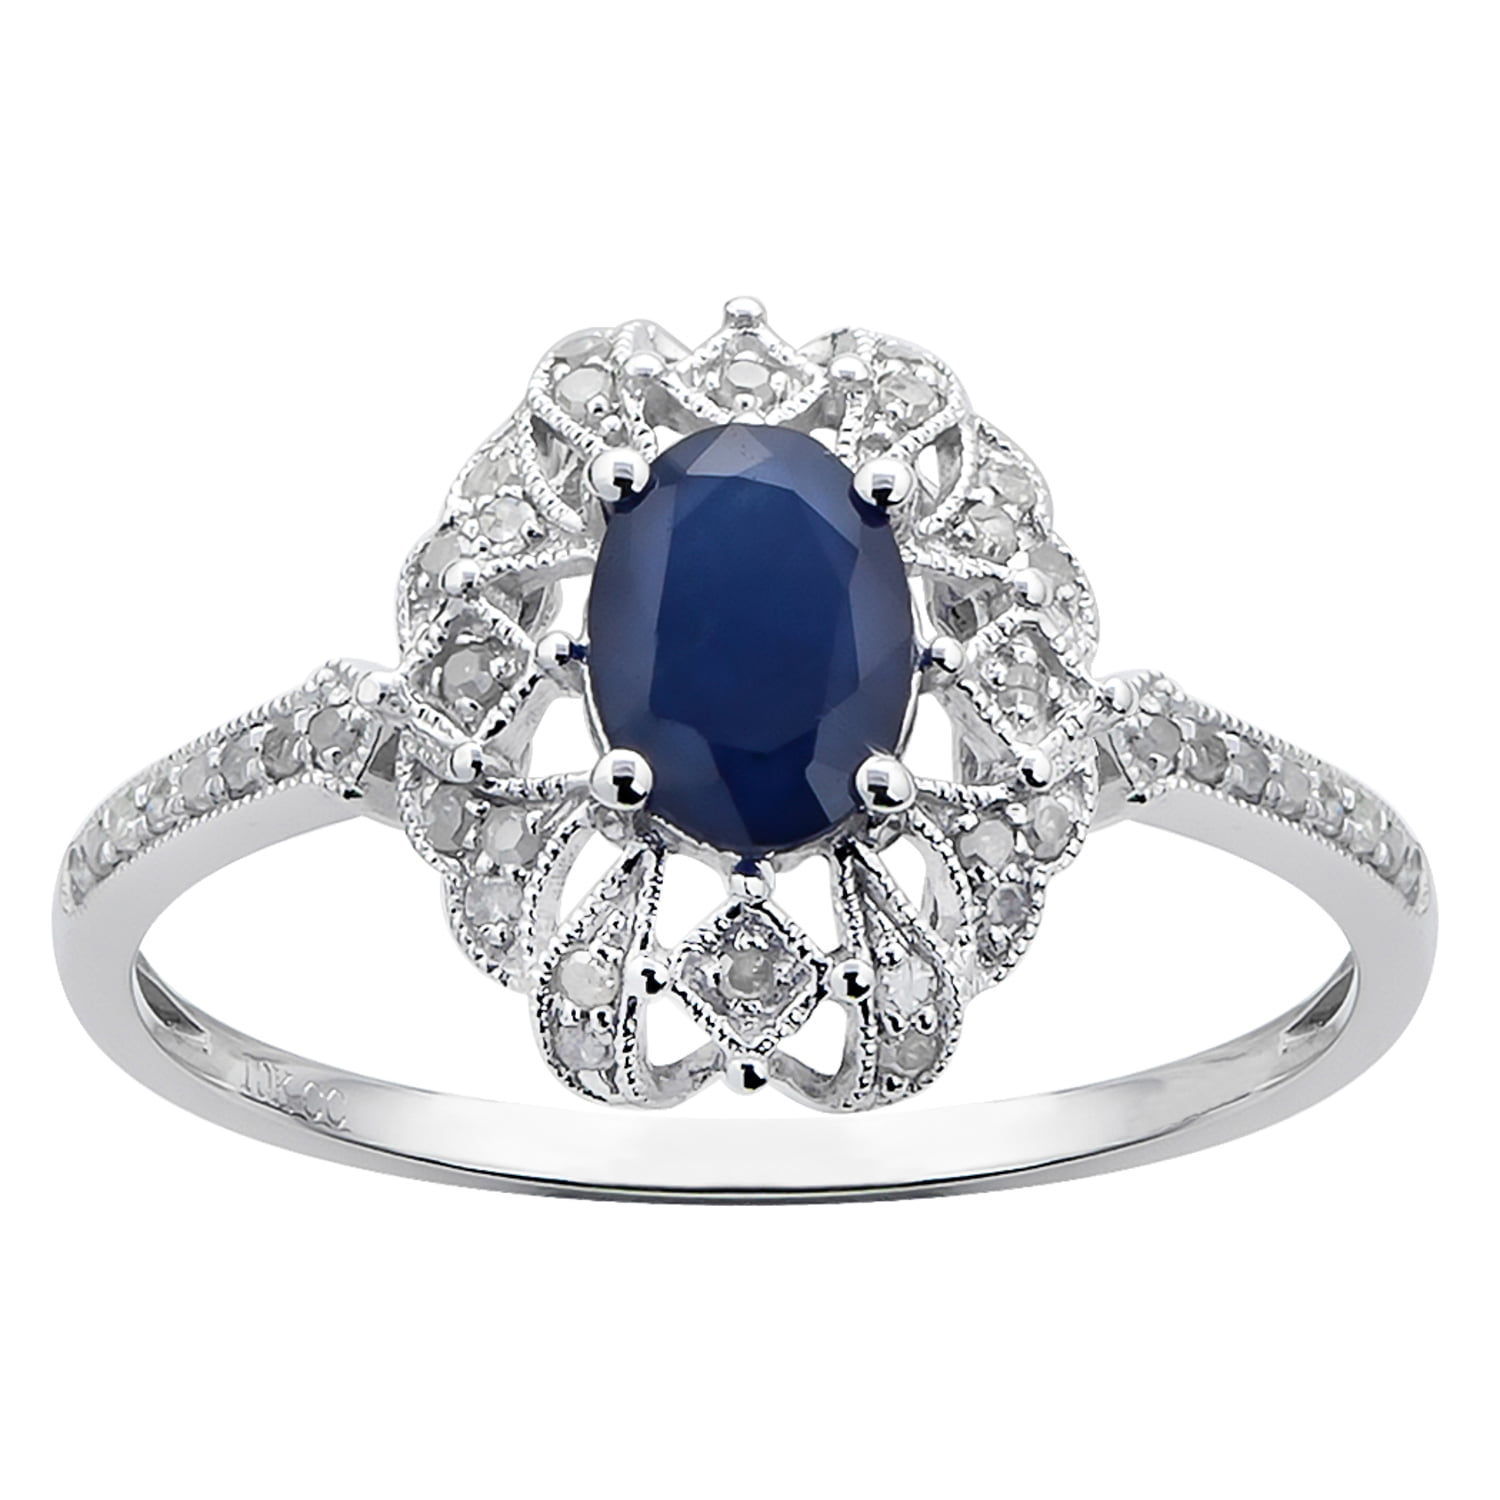 White Gold Genuine Vintage Style Sapphire and Diamond Ring 